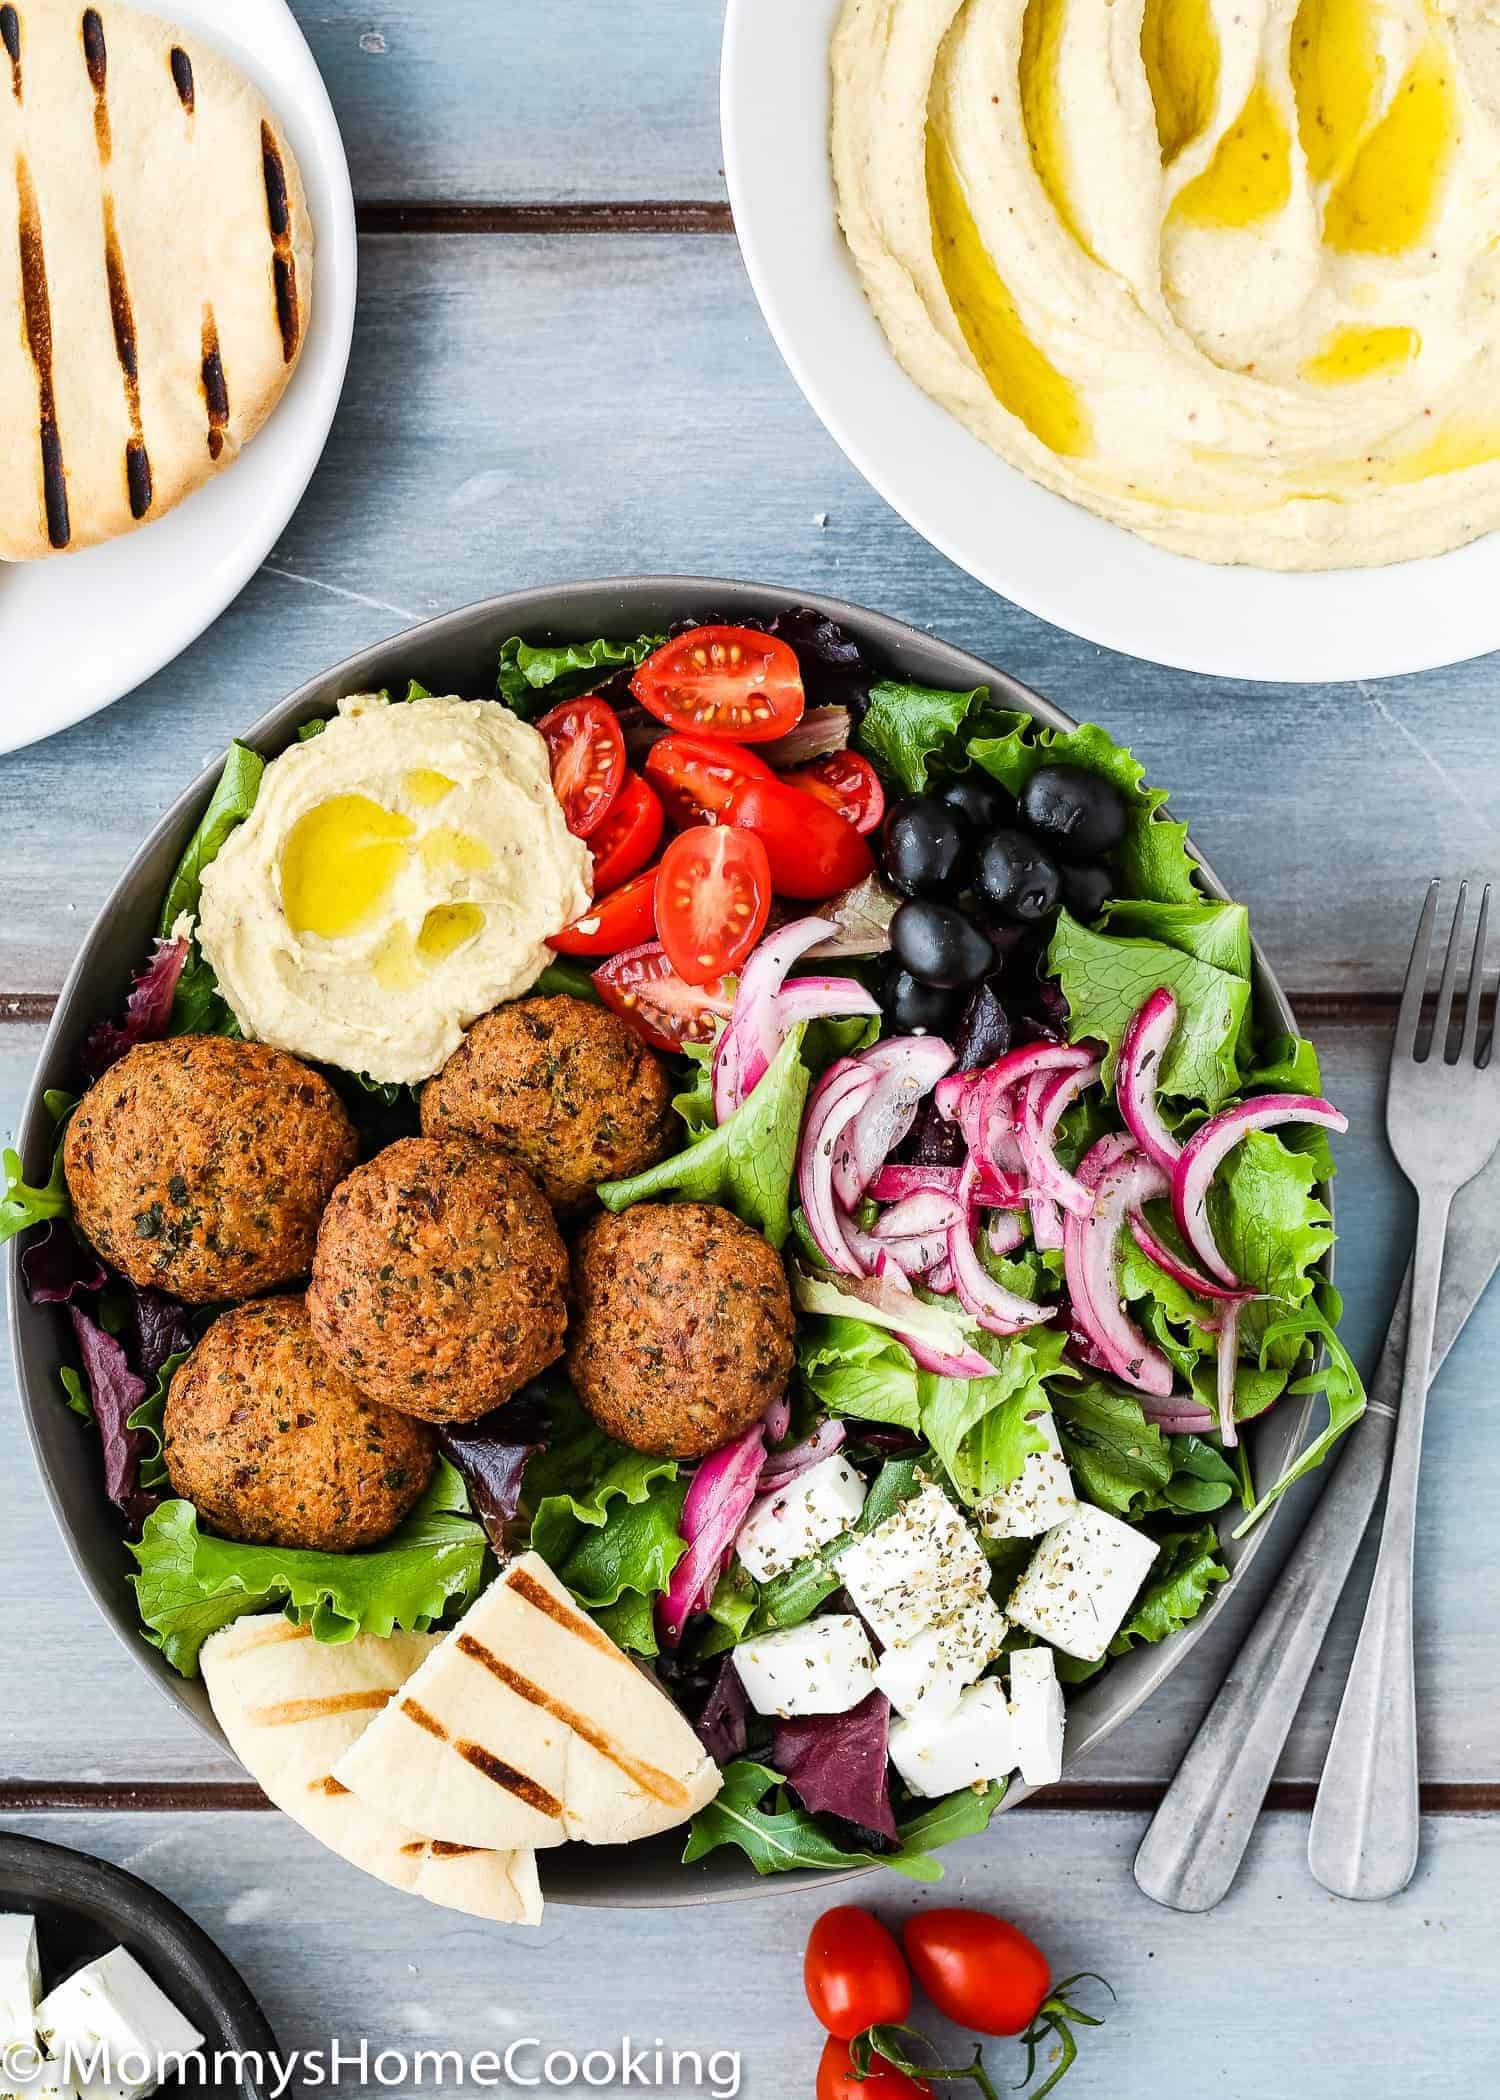 This Falafel Salad Bowls with Mustard Hummus is a burst of Mediterranean flavors in every bite! It’s not only easy to make, but delicious and satisfying too. A perfect meatless meal to share with family and friends during lent time! https://mommyshomecooking.com